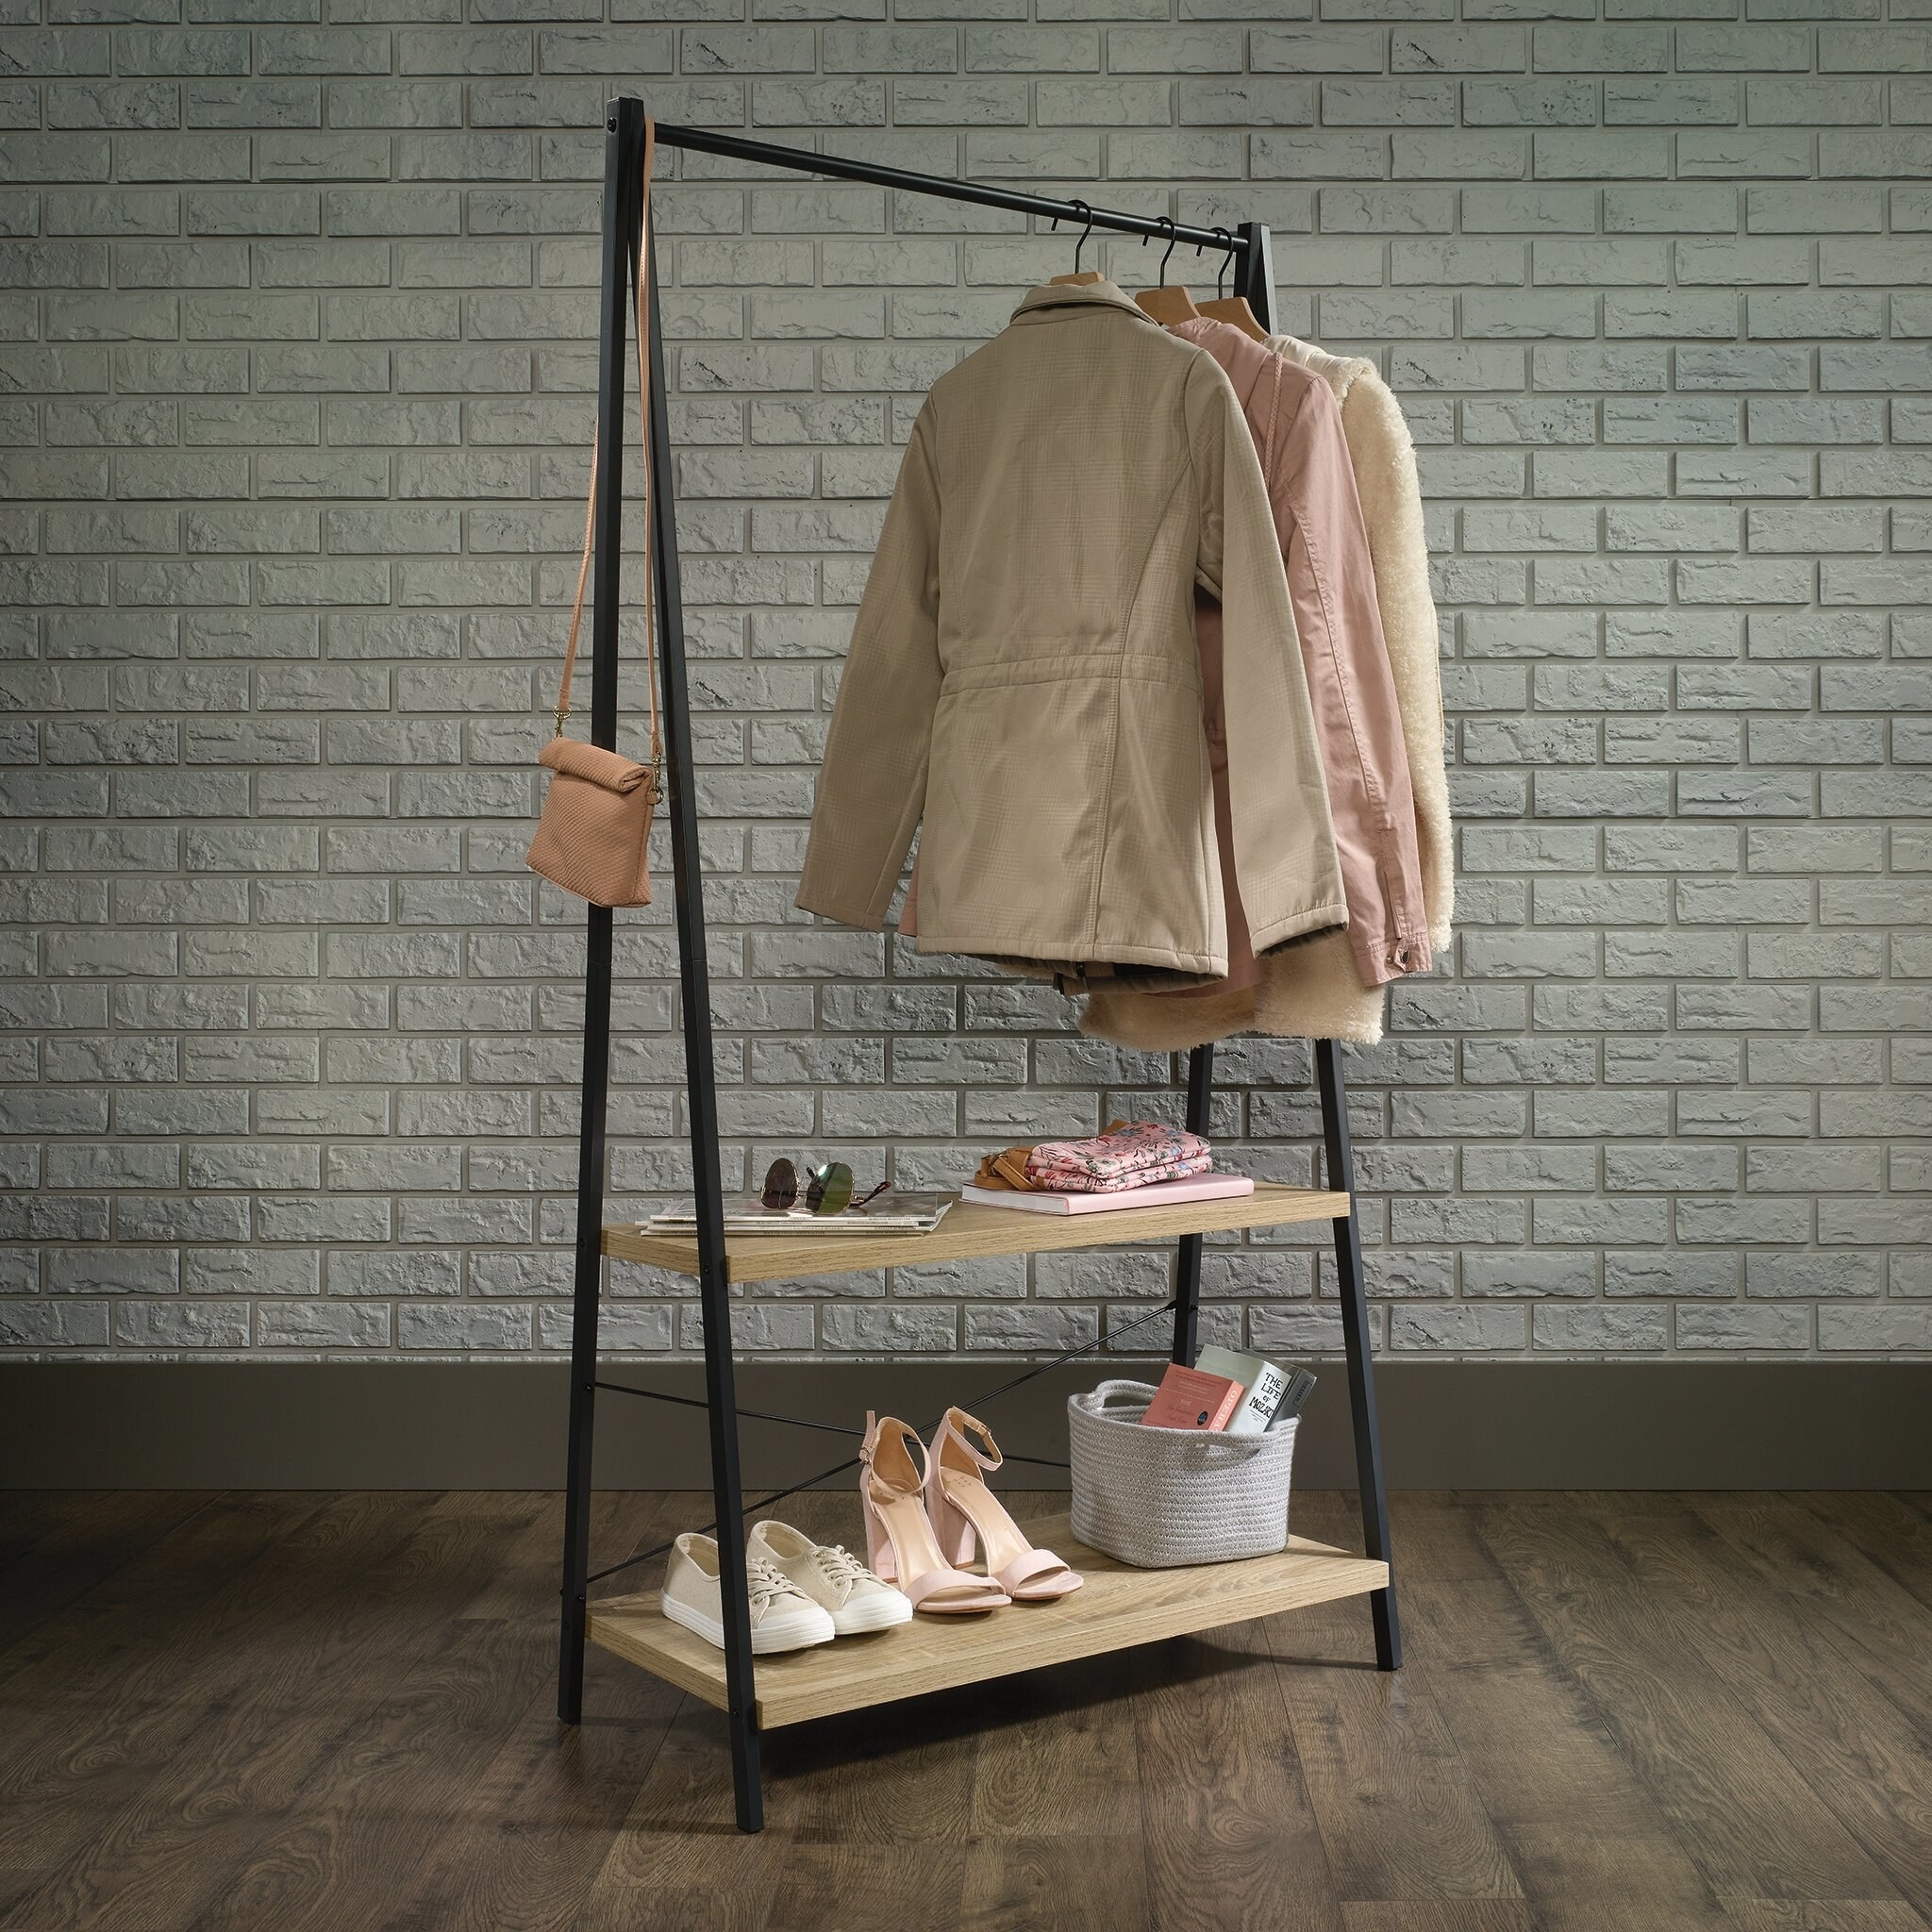 32&quot; clothes rack with shoes and clothes on hangers in the middle of a room